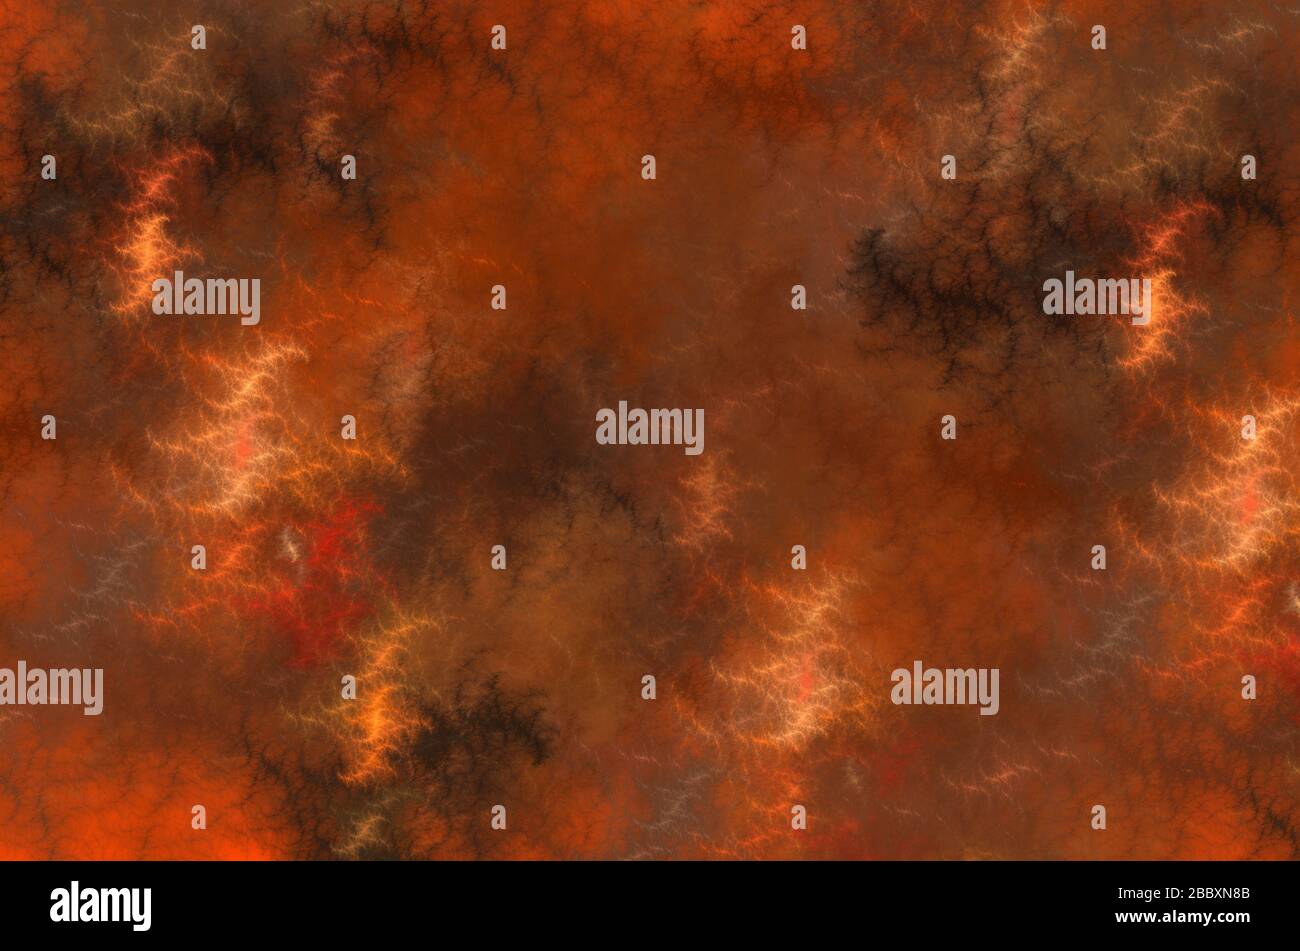 Abstract background in red and dark shades for graphic and web design Stock Photo